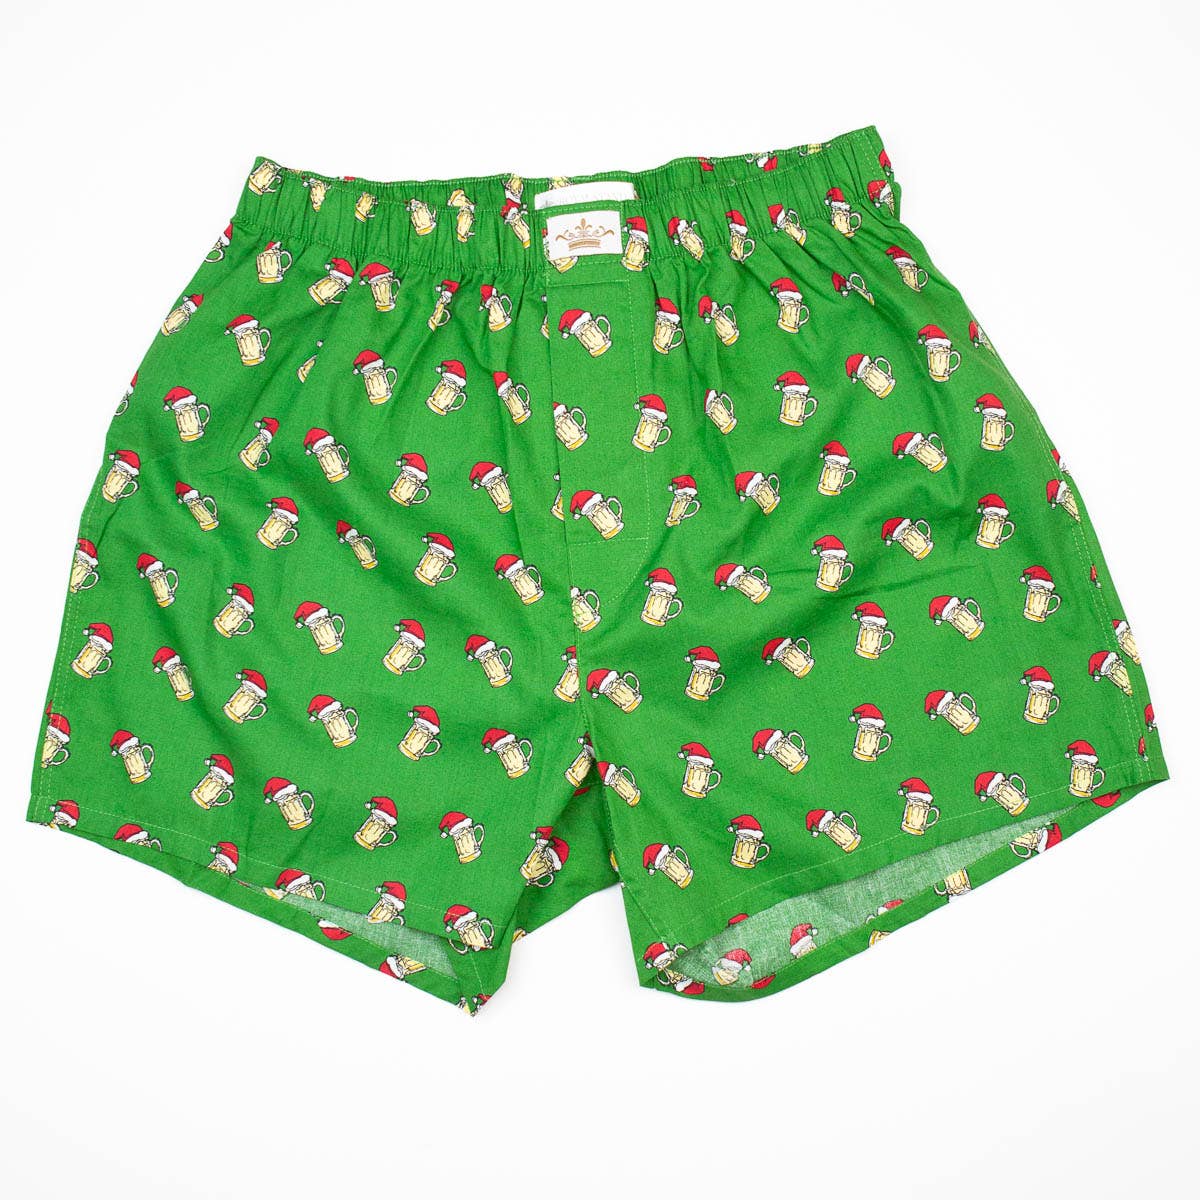 Men's Christmas Beer Cheers Boxers   Green/Red/Yellow   -Asst.: Small